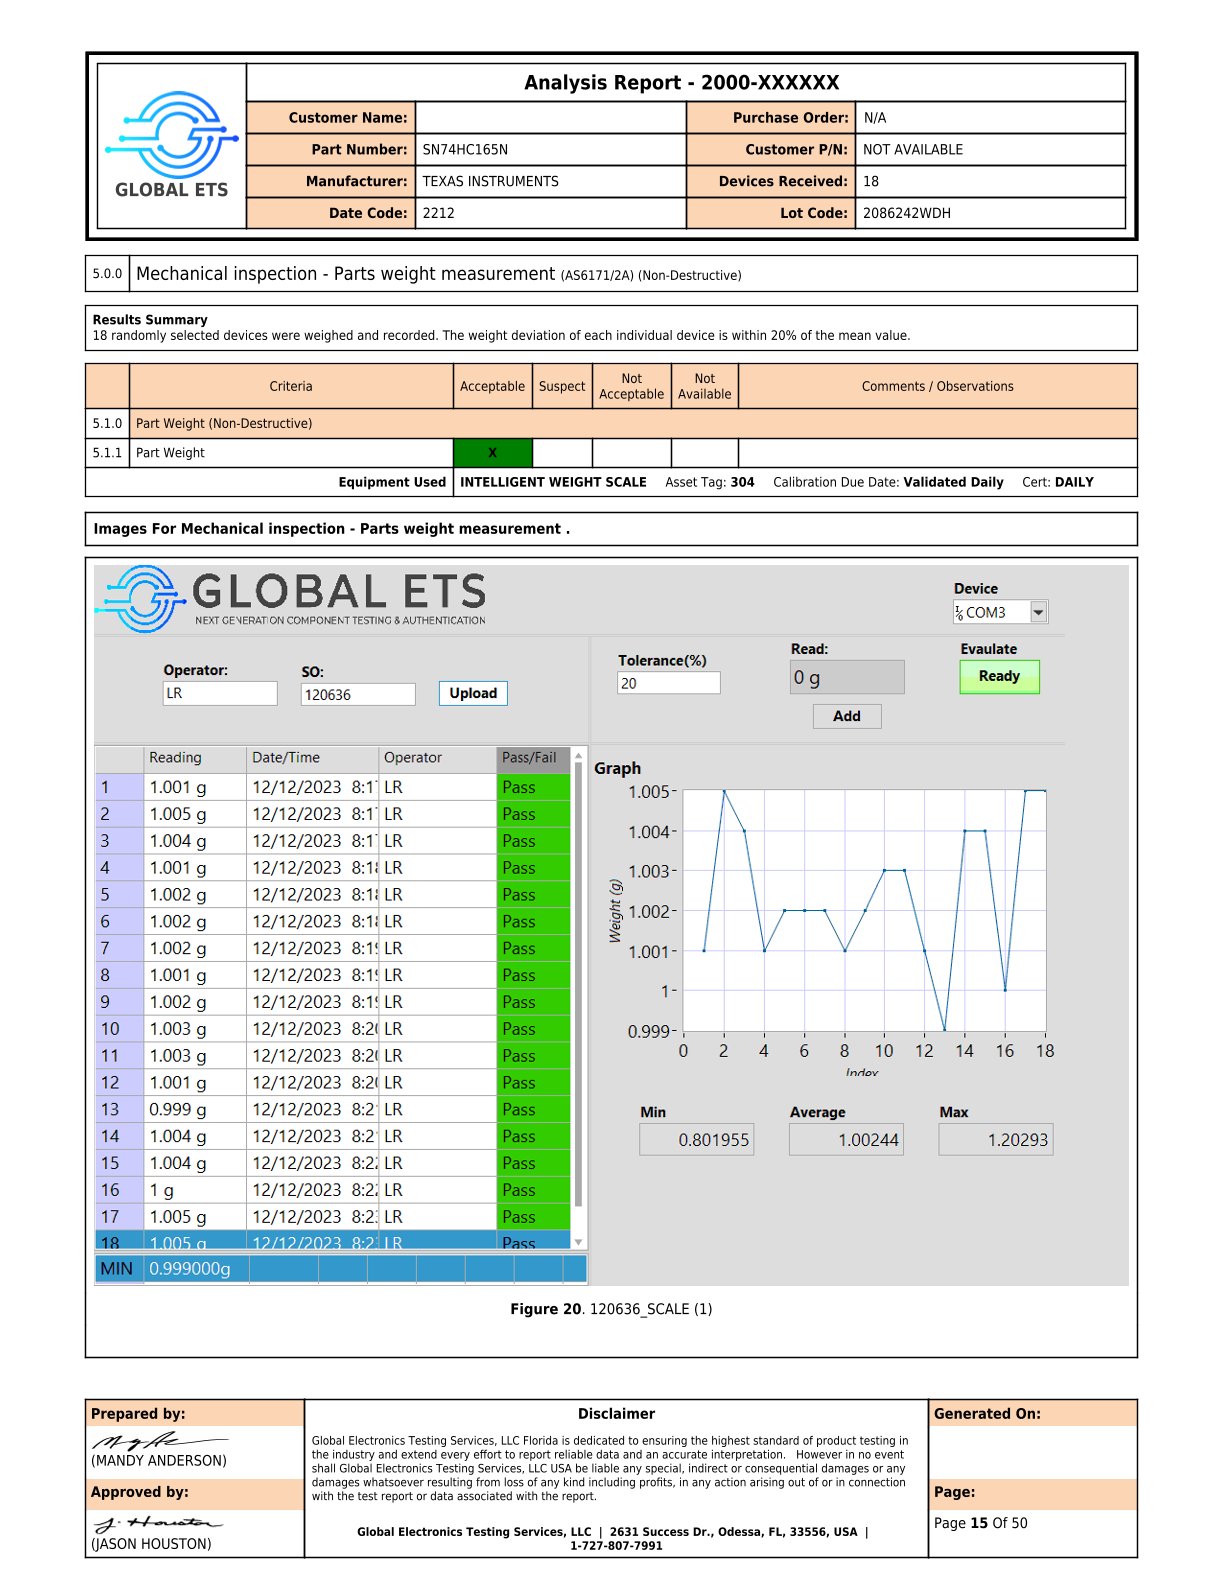 A detailed analysis report from Global ETS with customer name, part number, and manufacturer information at the top. The report includes a table summarizing mechanical inspection results for parts weight measurement, indicating 18 devices were tested with an acceptable weight deviation within 20% of the mean value. The report has an images section with a photo of the equipment used, an Intelligent Weight Scale, and a table listing individual readings with pass/fail status. A line graph visualizes the weight measurements, showing minimum, average, and maximum values. The report also includes a disclaimer and contact information for Global Electronics Testing Services, LLC.